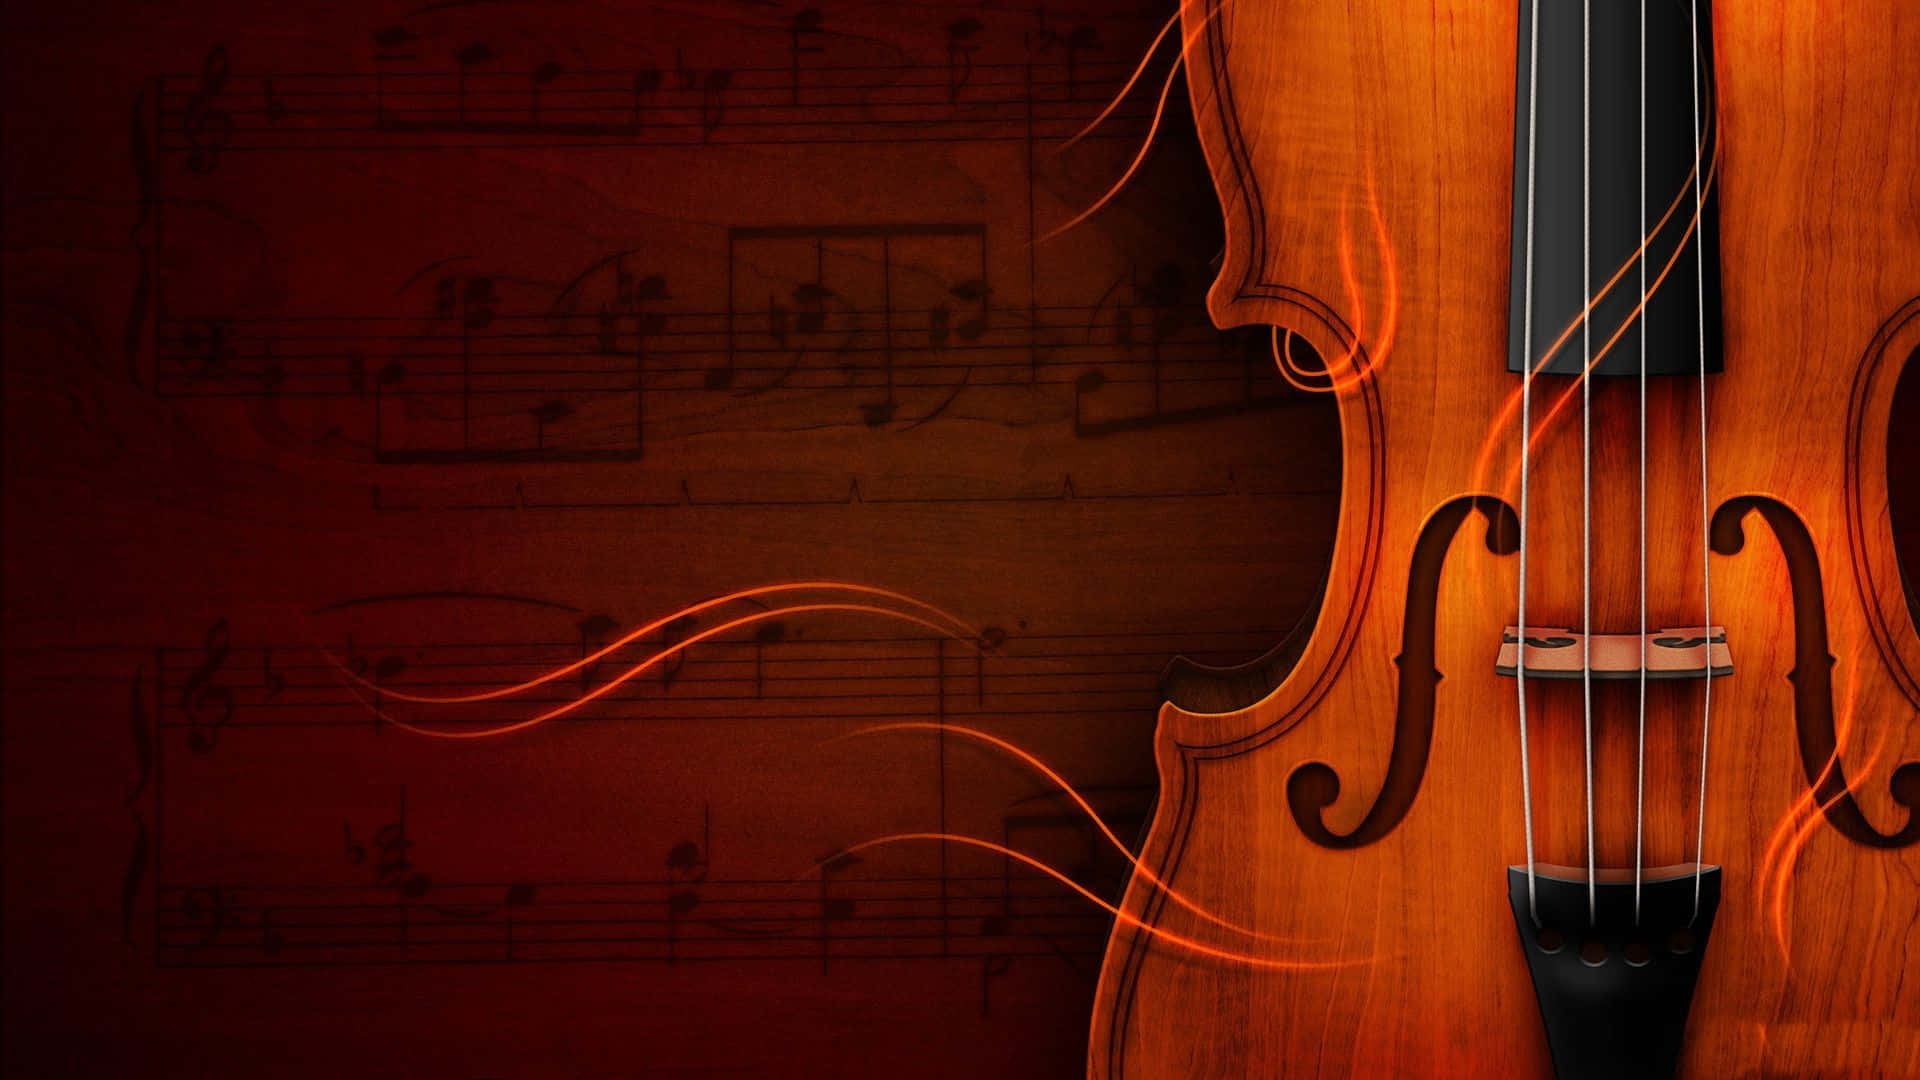 Embrace the art of playing the violin Wallpaper